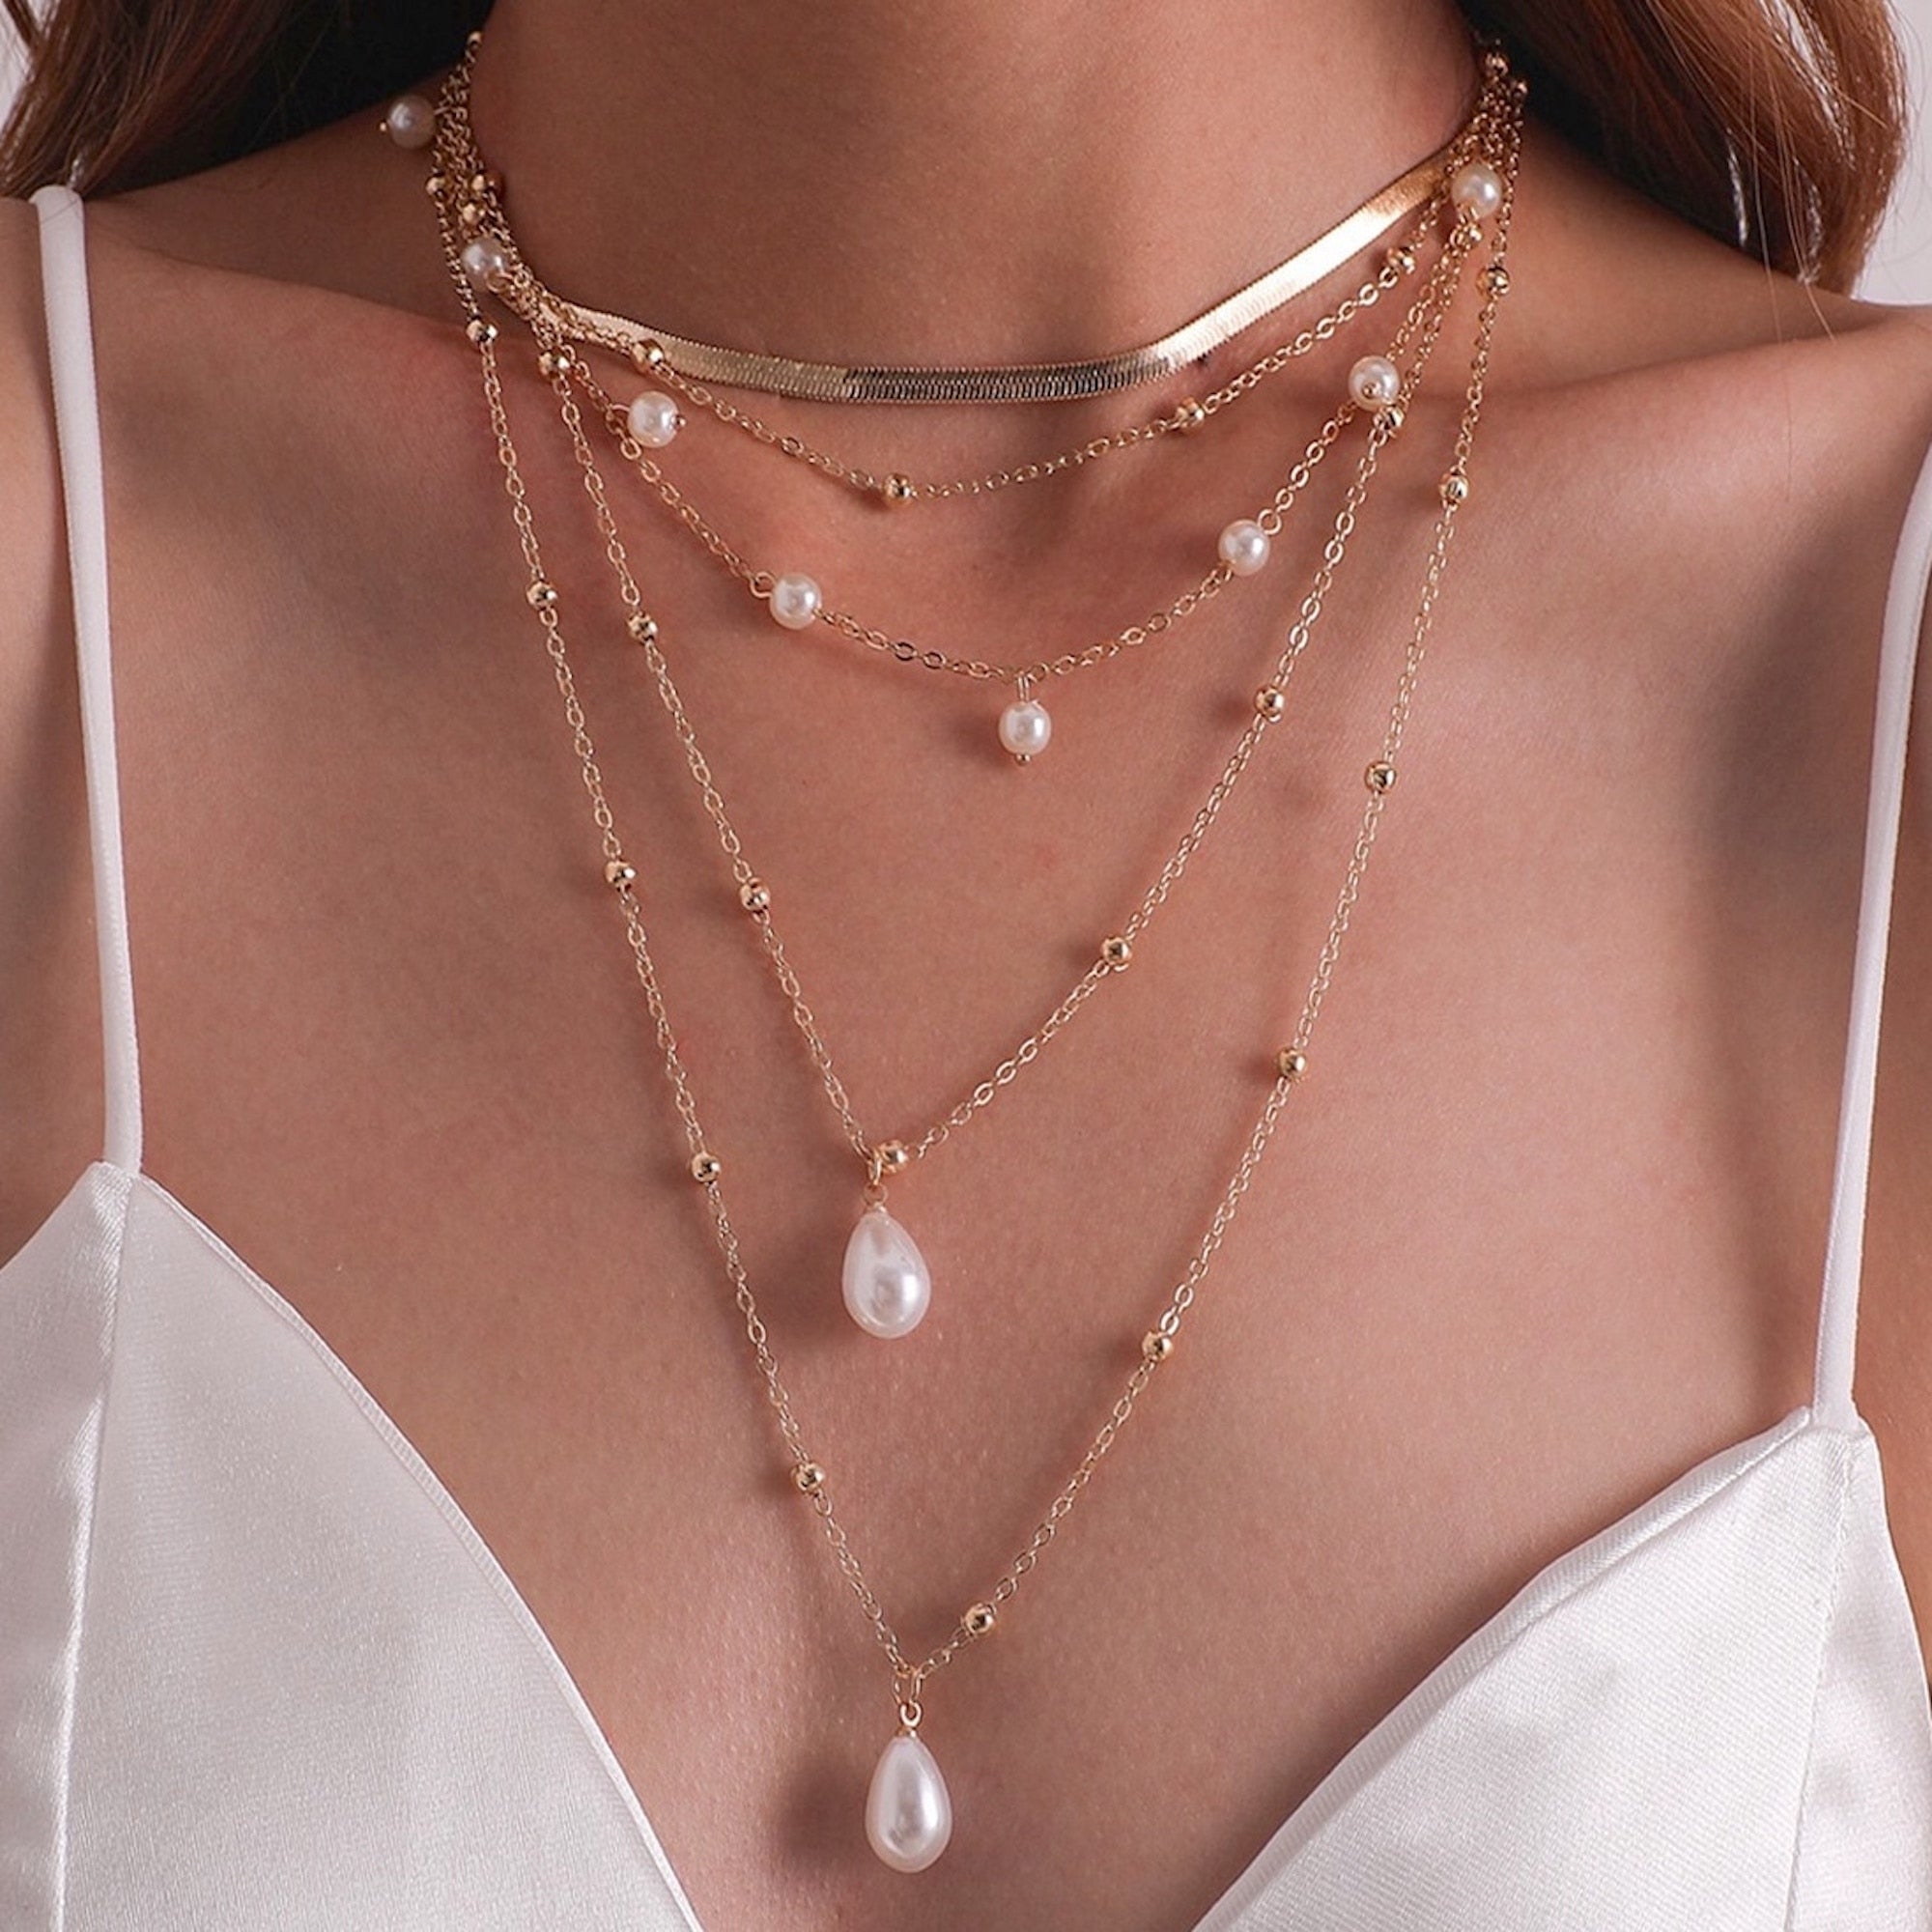 A How to Guide to Layering Necklaces | Capitol Hill Style